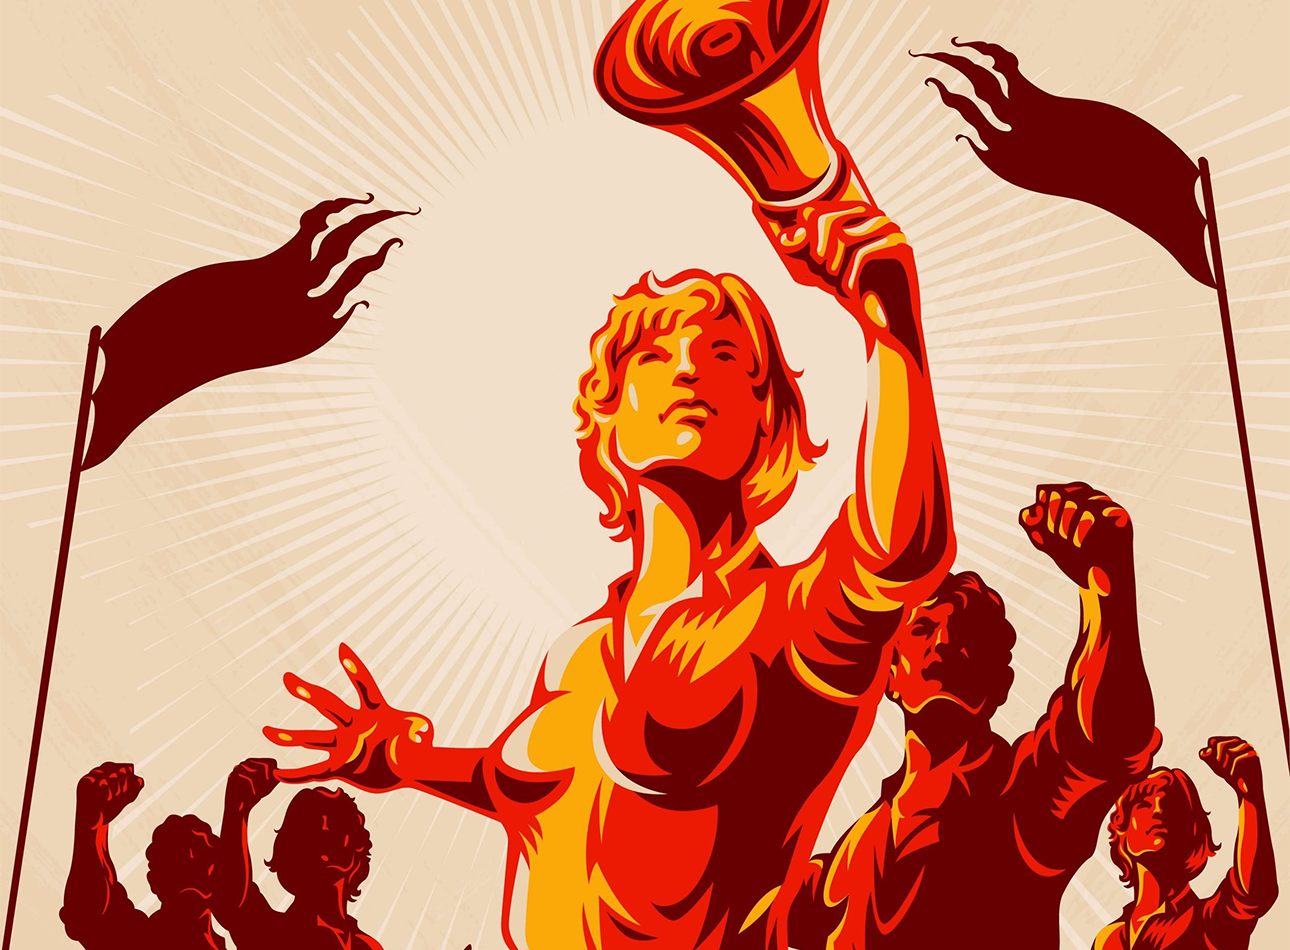 An orange based graphic of a woman leading a march of people, holding a megaphone